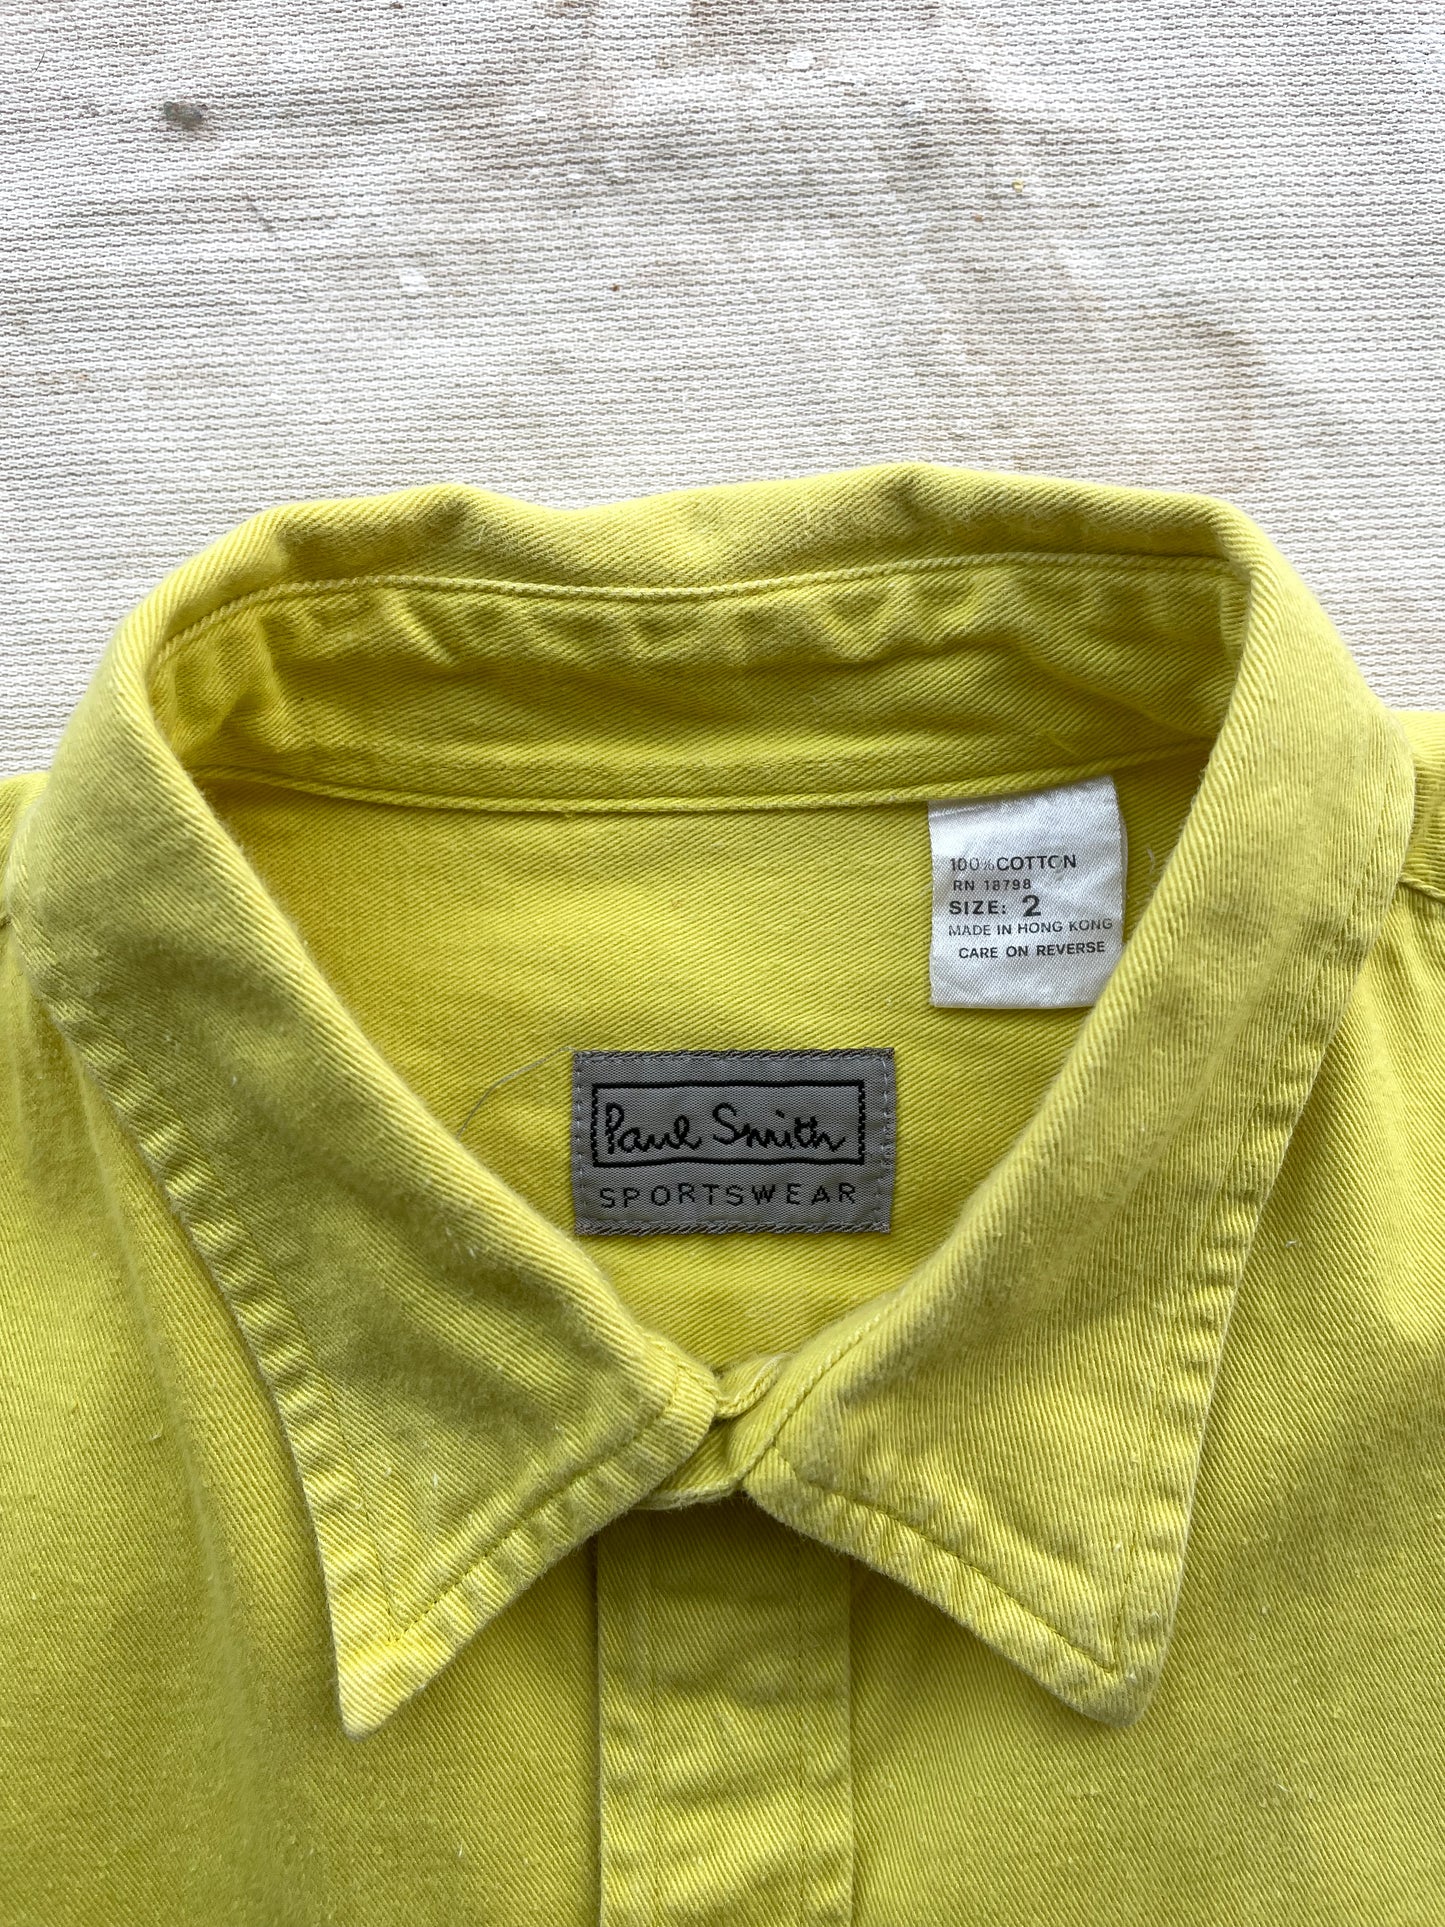 PAUL SMITH BUTTON UP SHIRT—YELLOW [L]